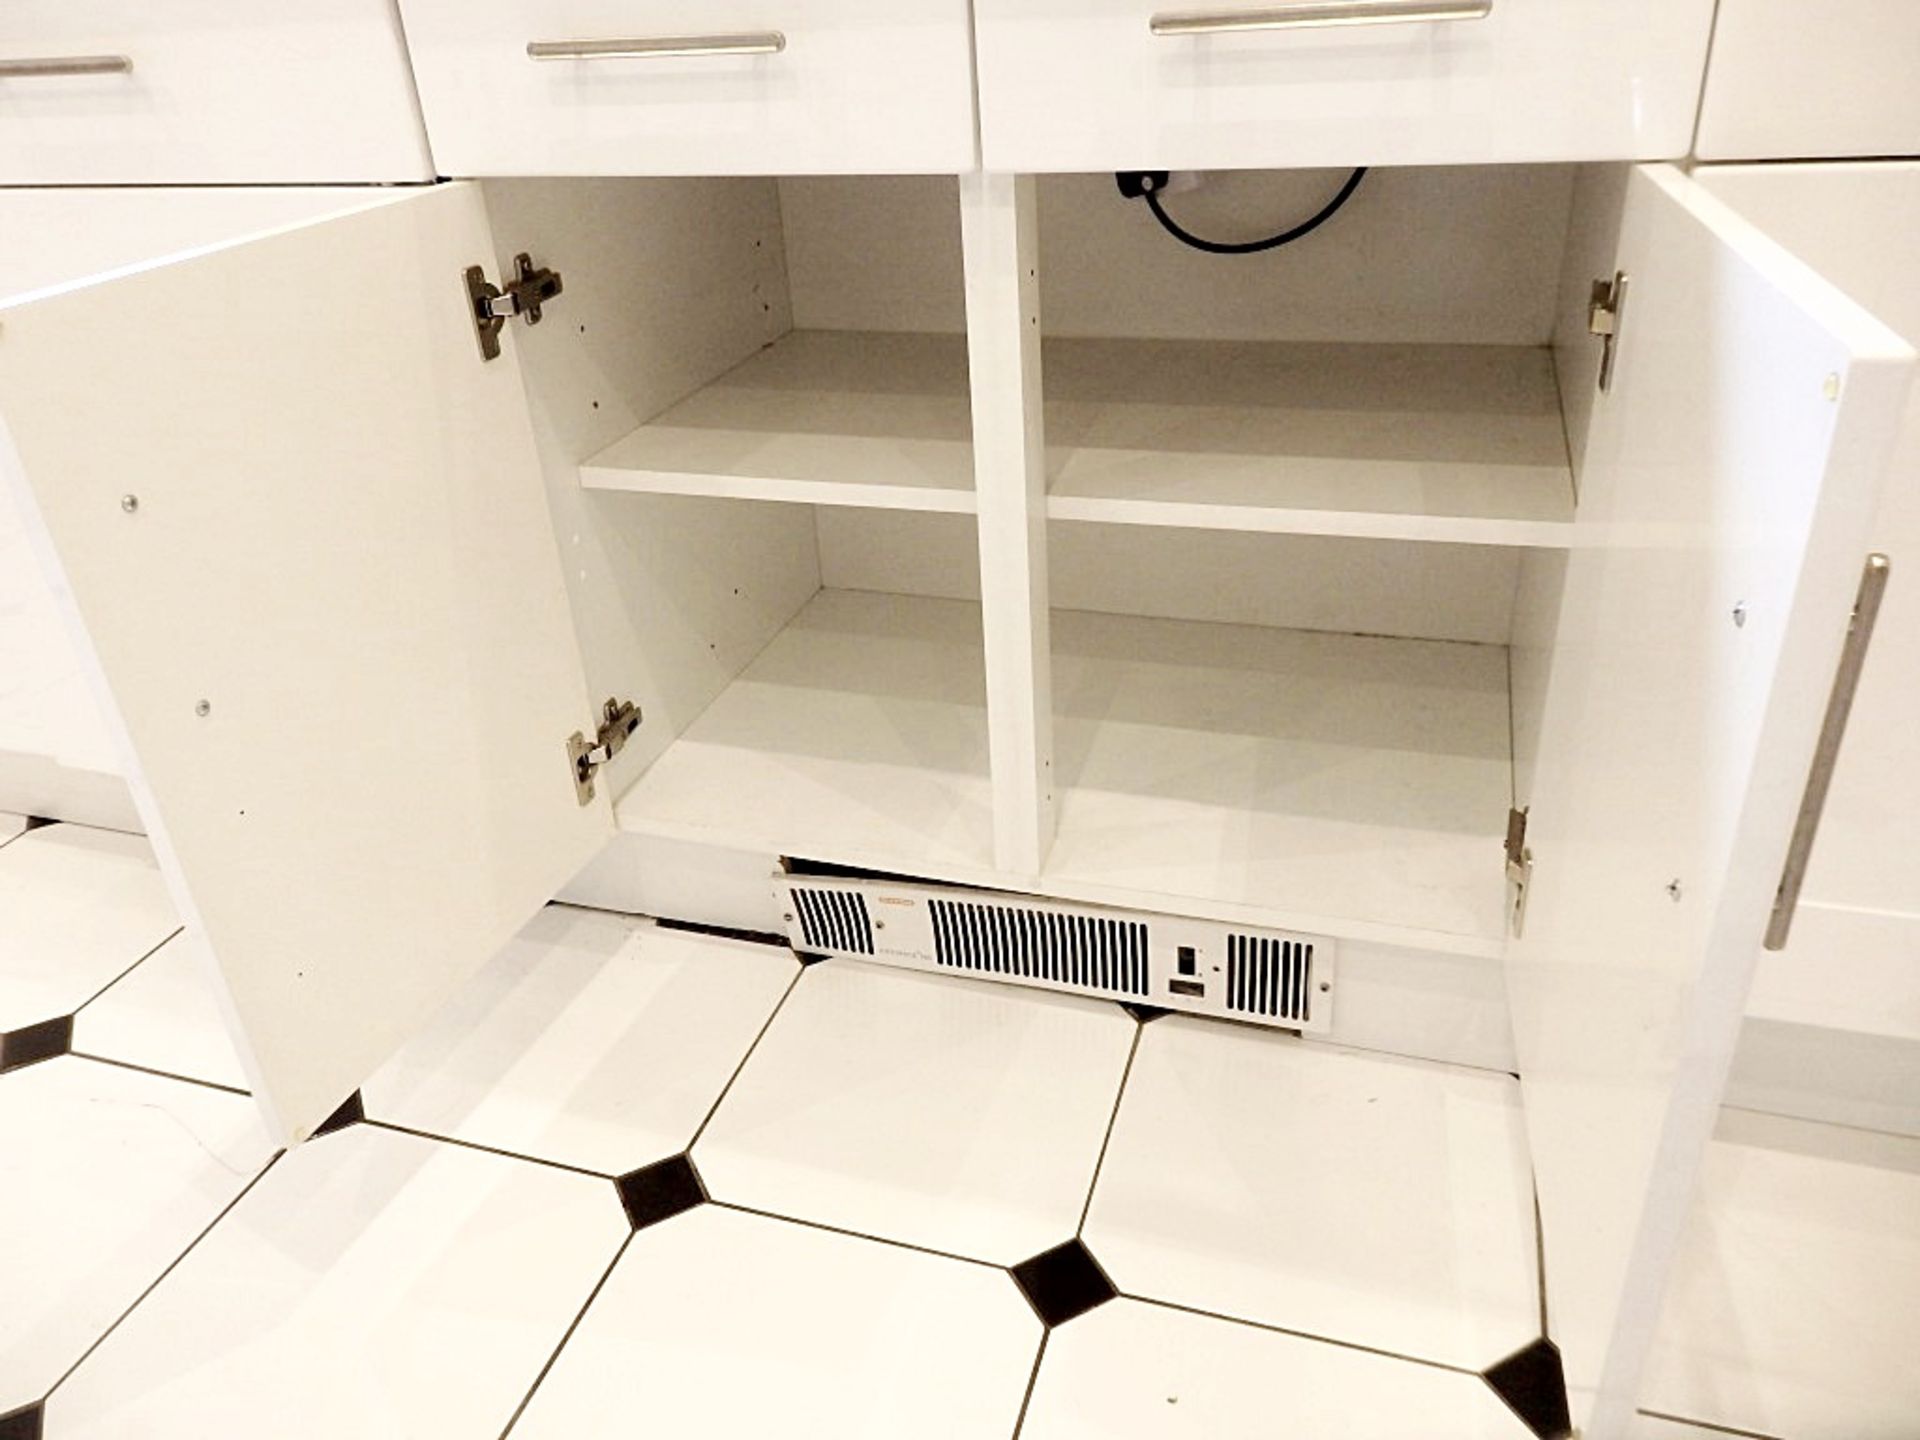 1 x White High Gloss Kitchen With Neff Integrated Dishwasher, 5 Ring Stainless Steel Hob, and - Image 16 of 20